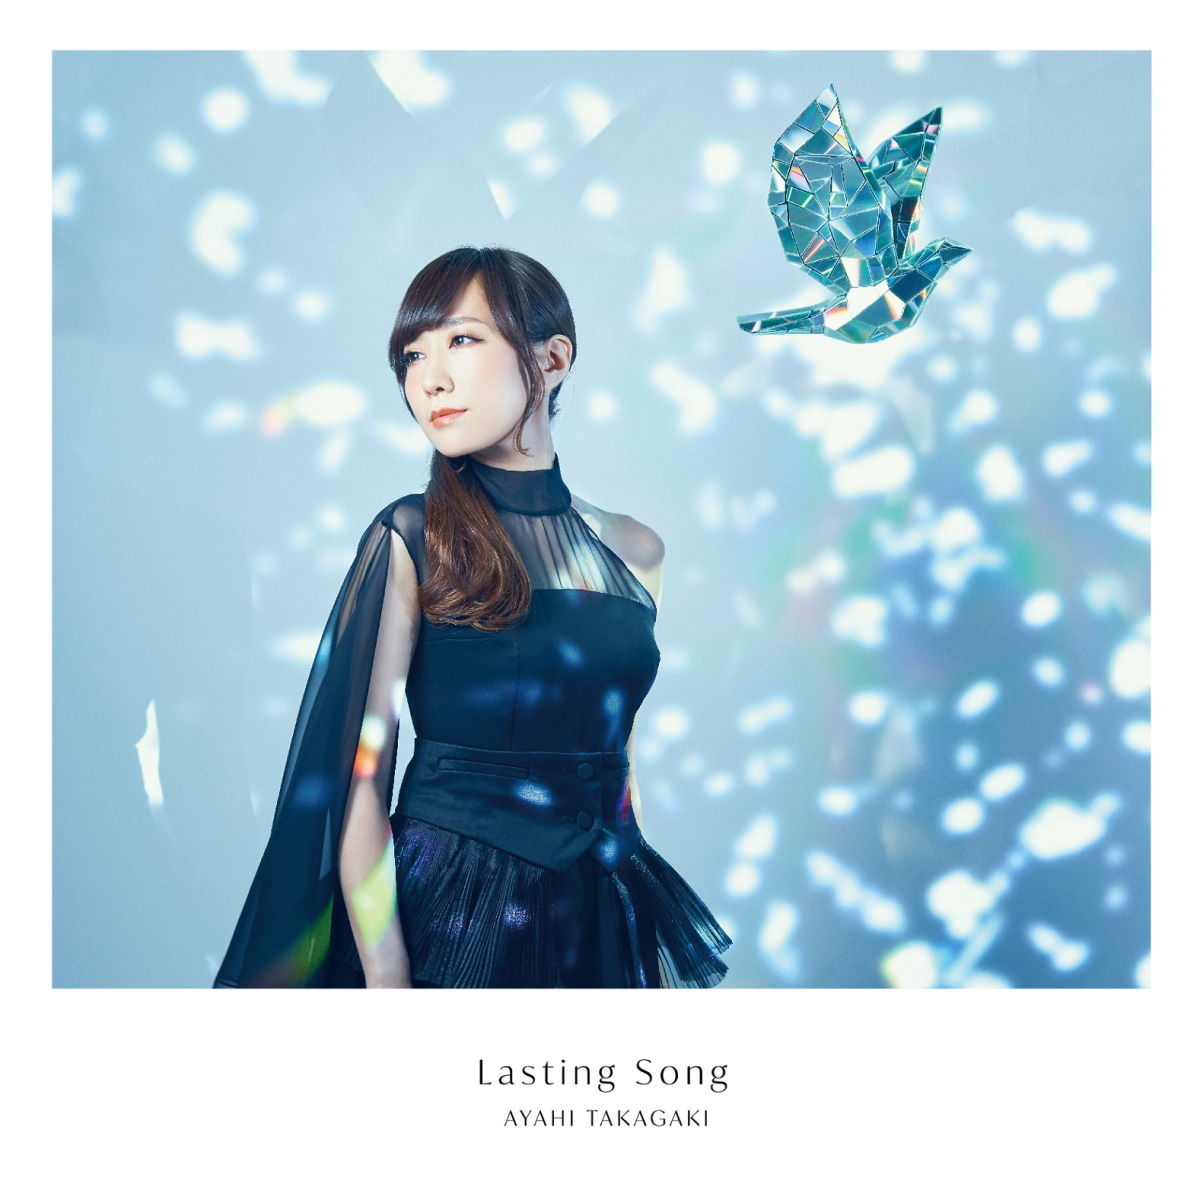 Cover art for『Ayahi Takagaki - Shiawase no Katachi』from the release『Lasting Song』